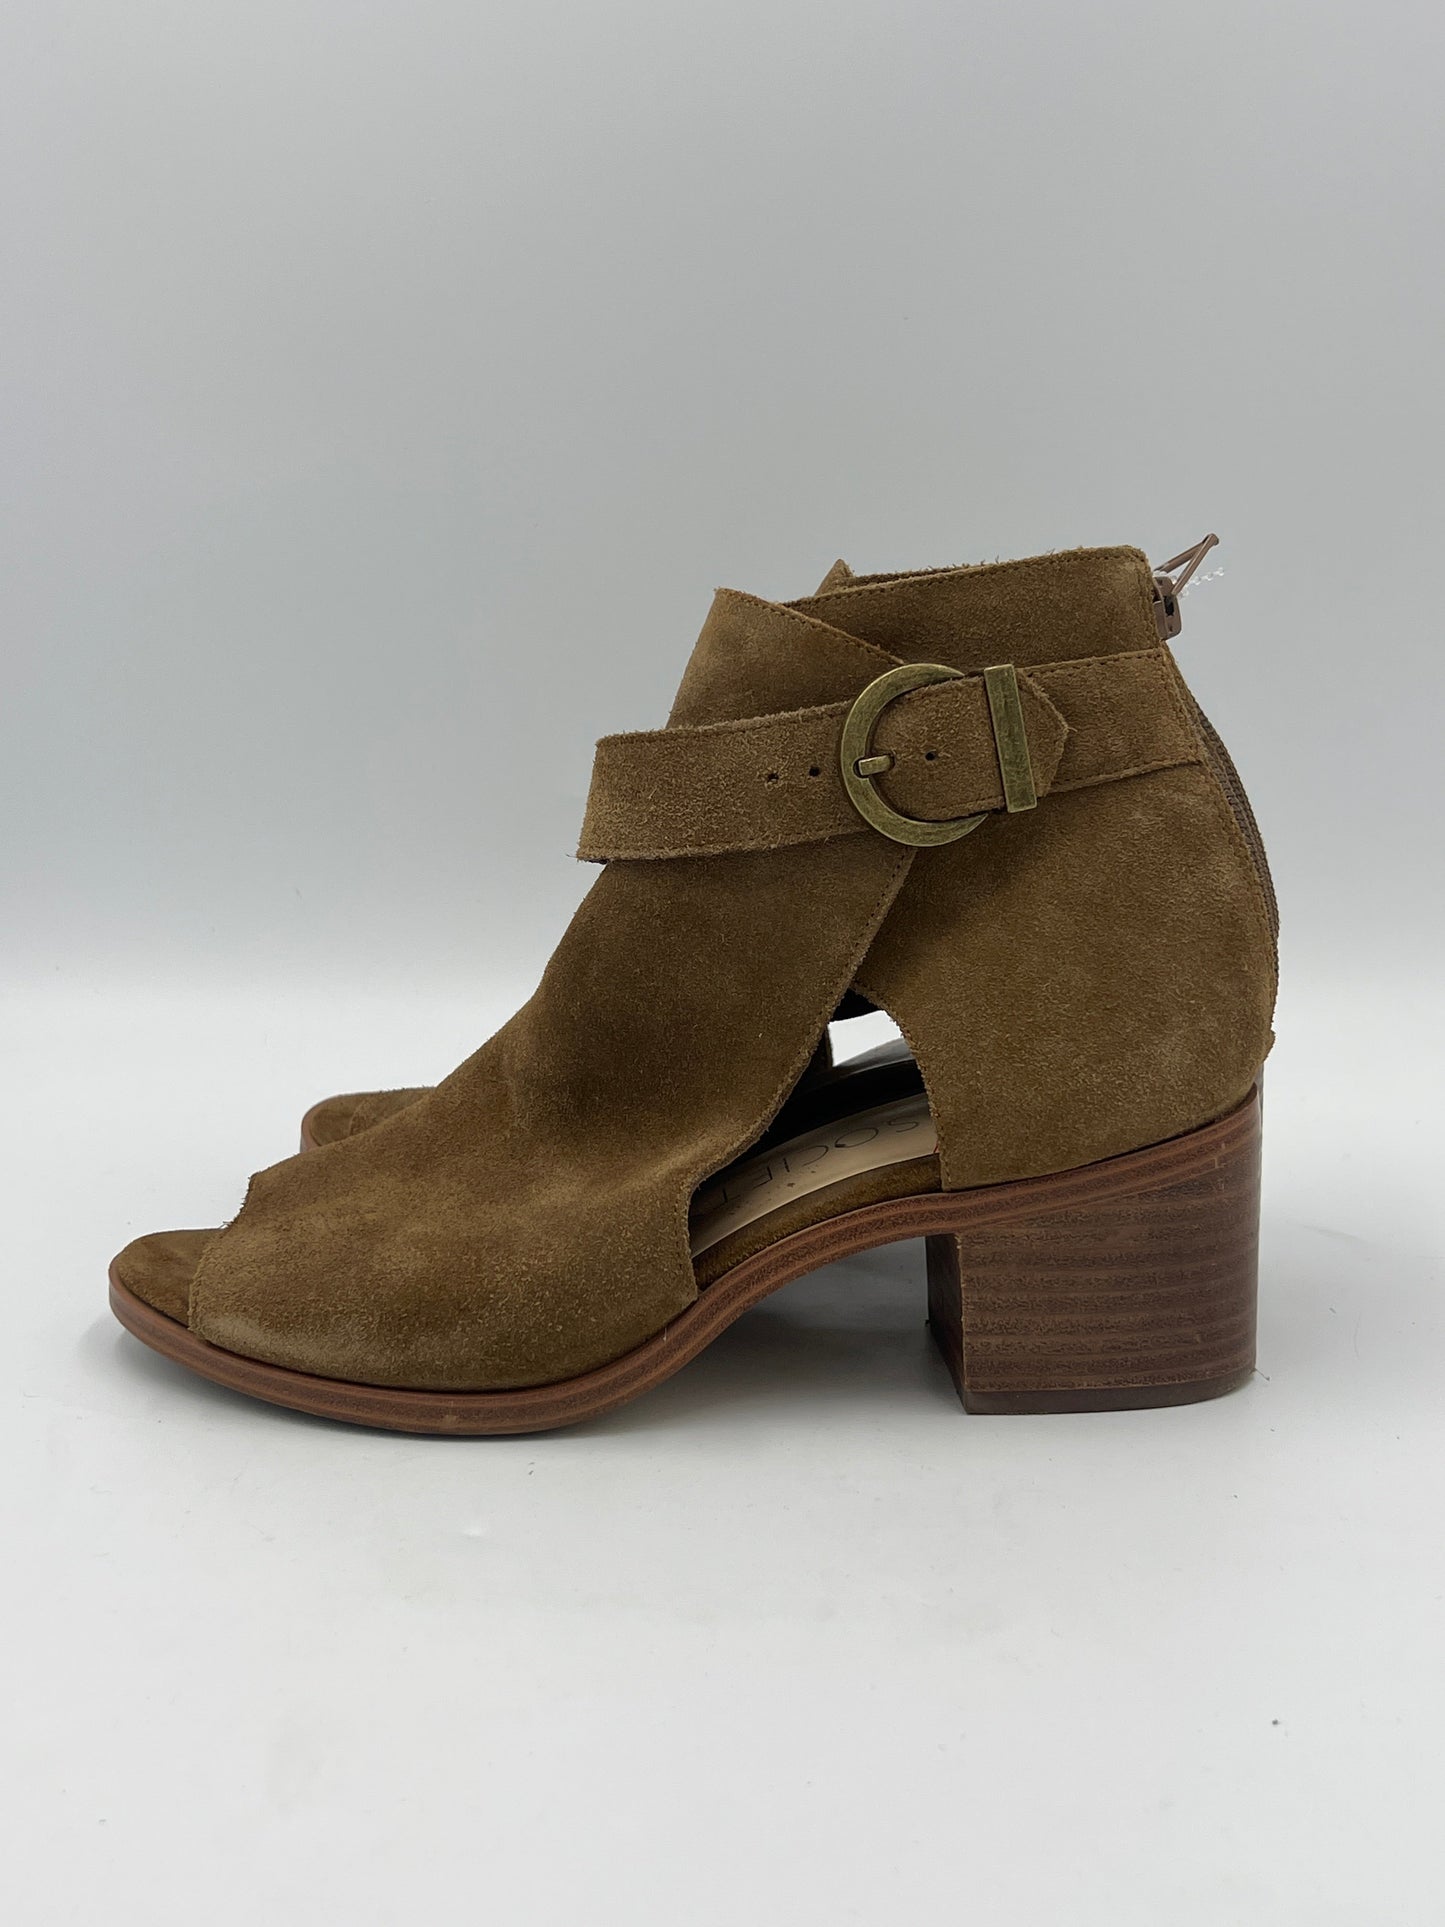 Boots Ankle Heels By Sole Society  Size: 8